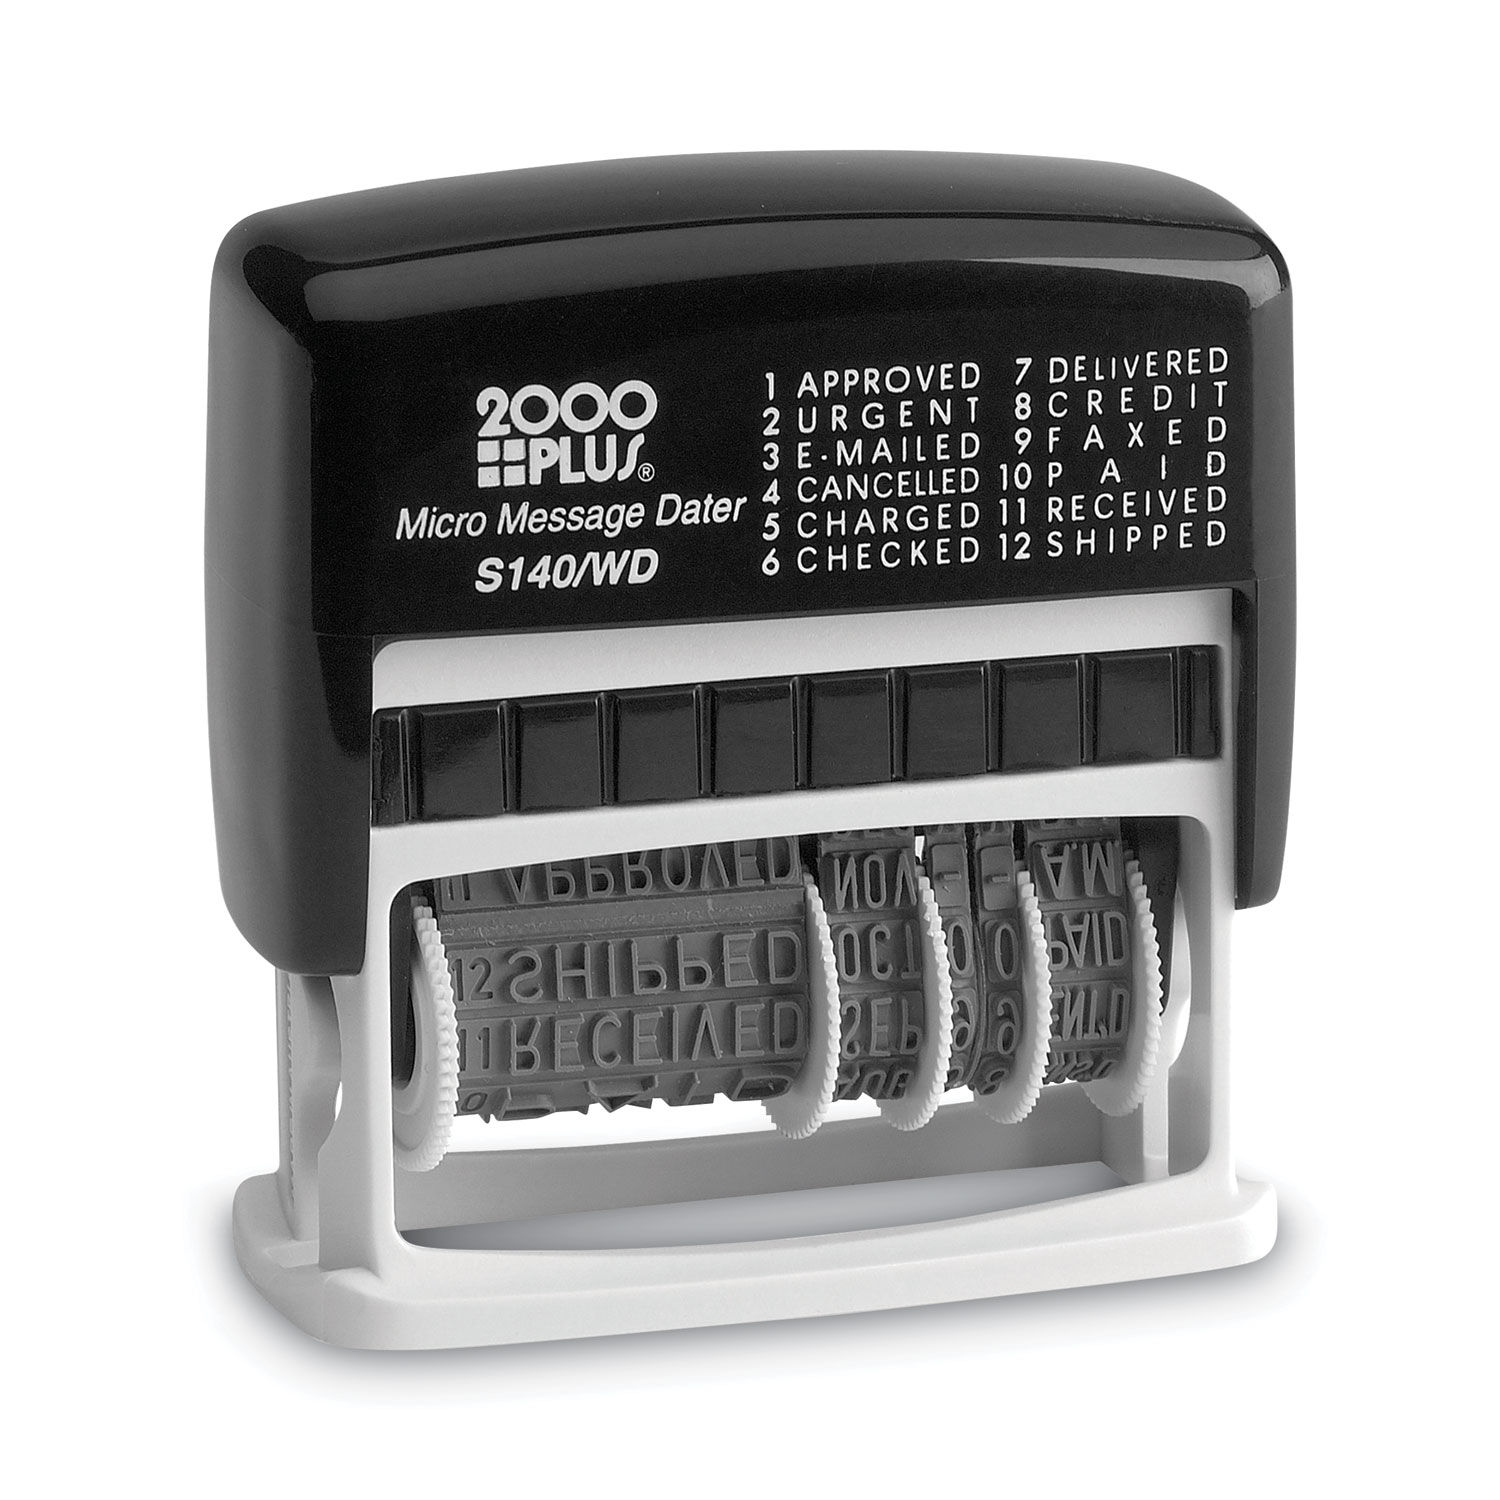 Micro Message Dater Self-Inking